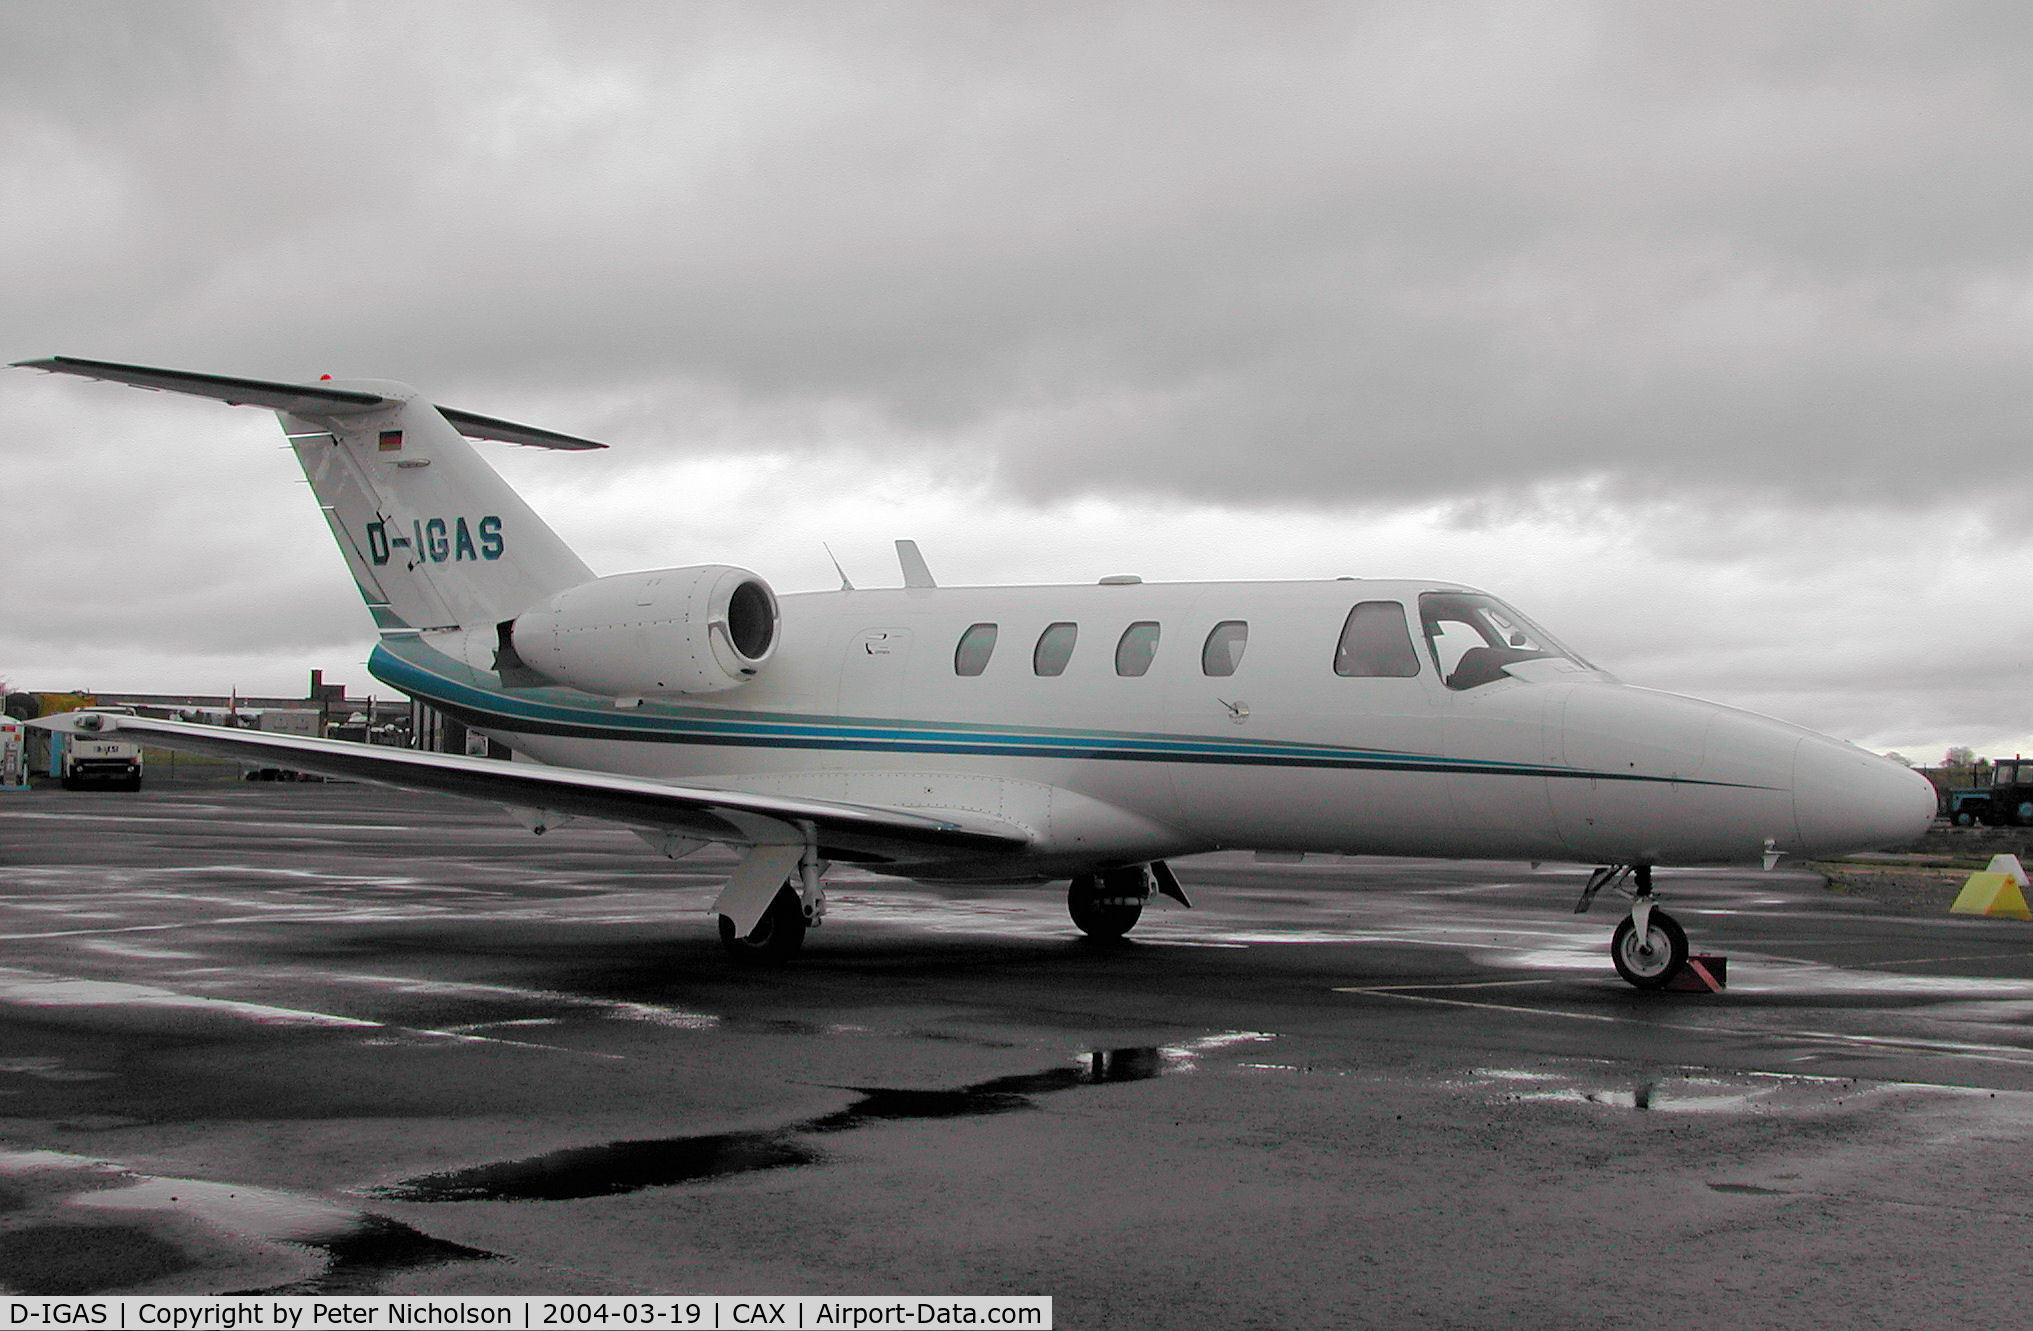 D-IGAS, 1997 Cessna 525 CitationJet C/N 525-0223, This visiting Cessna 525 CitationJet was seen at Carlisle in the Spring of 2004.